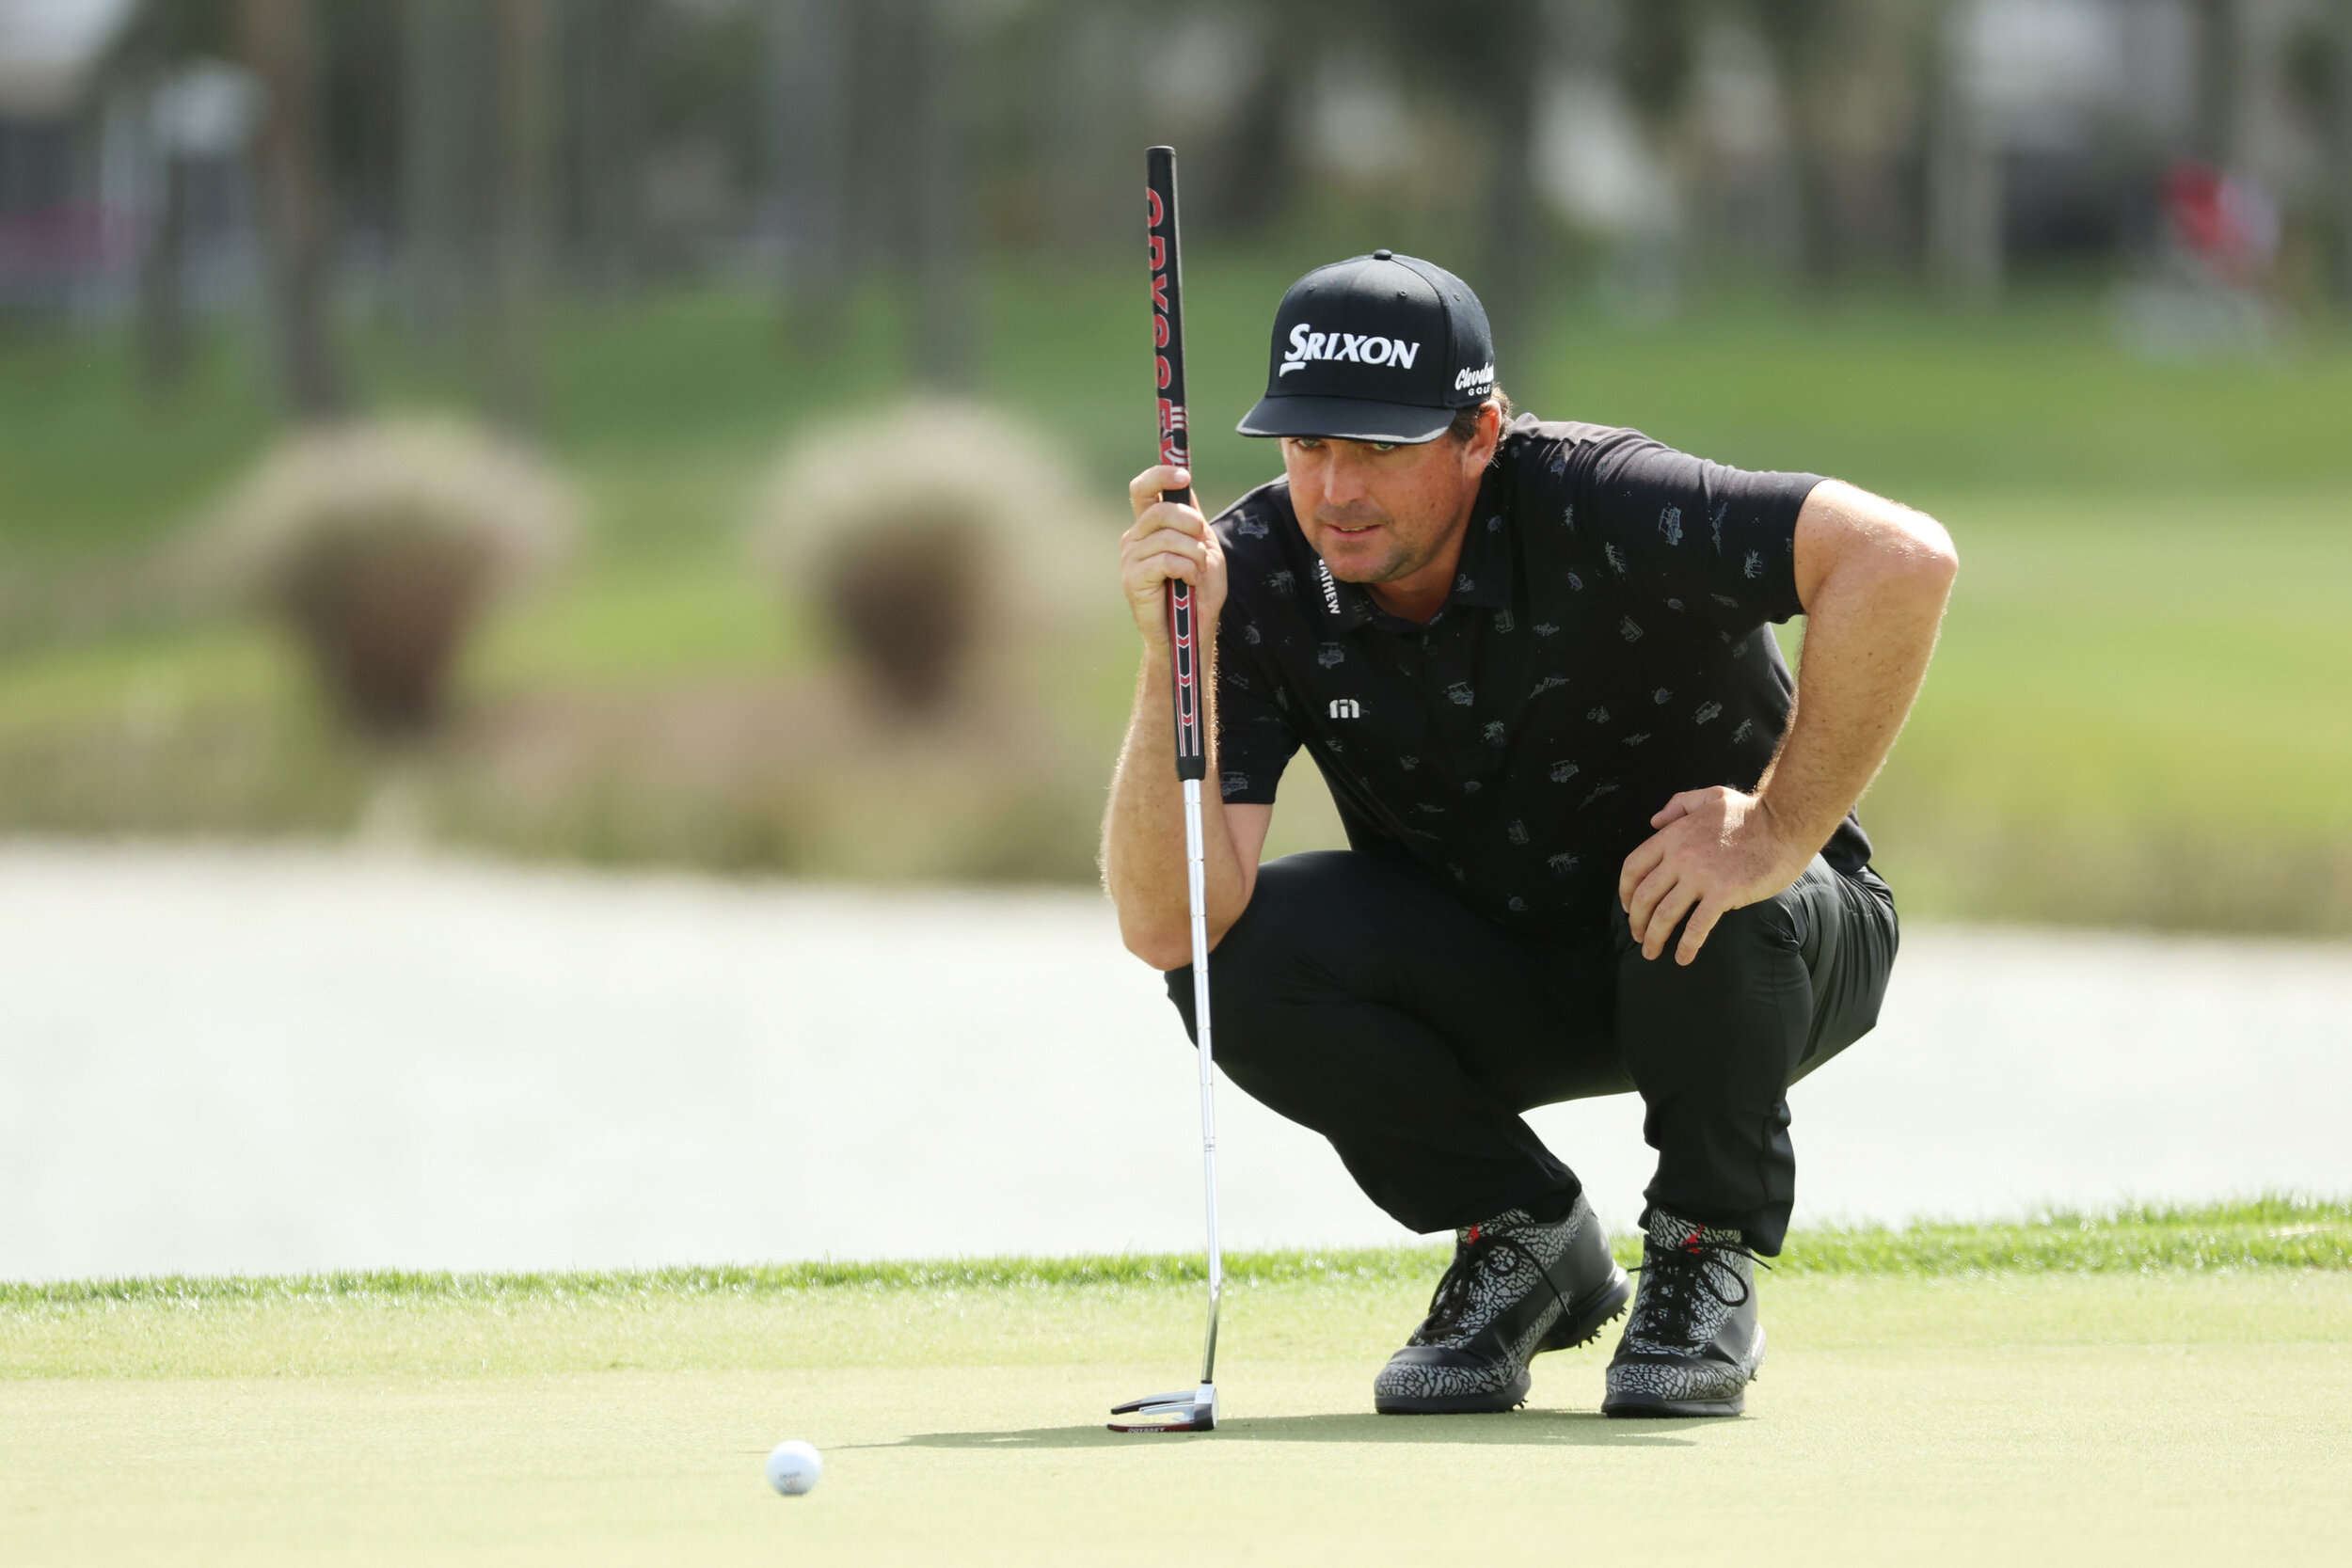  PALM BEACH GARDENS, FLORIDA - MARCH 20: Keegan Bradley of the United States lines up a putt on the 18th green during the third round of The Honda Classic at PGA National Champion course on March 20, 2021 in Palm Beach Gardens, Florida. (Photo by Cli